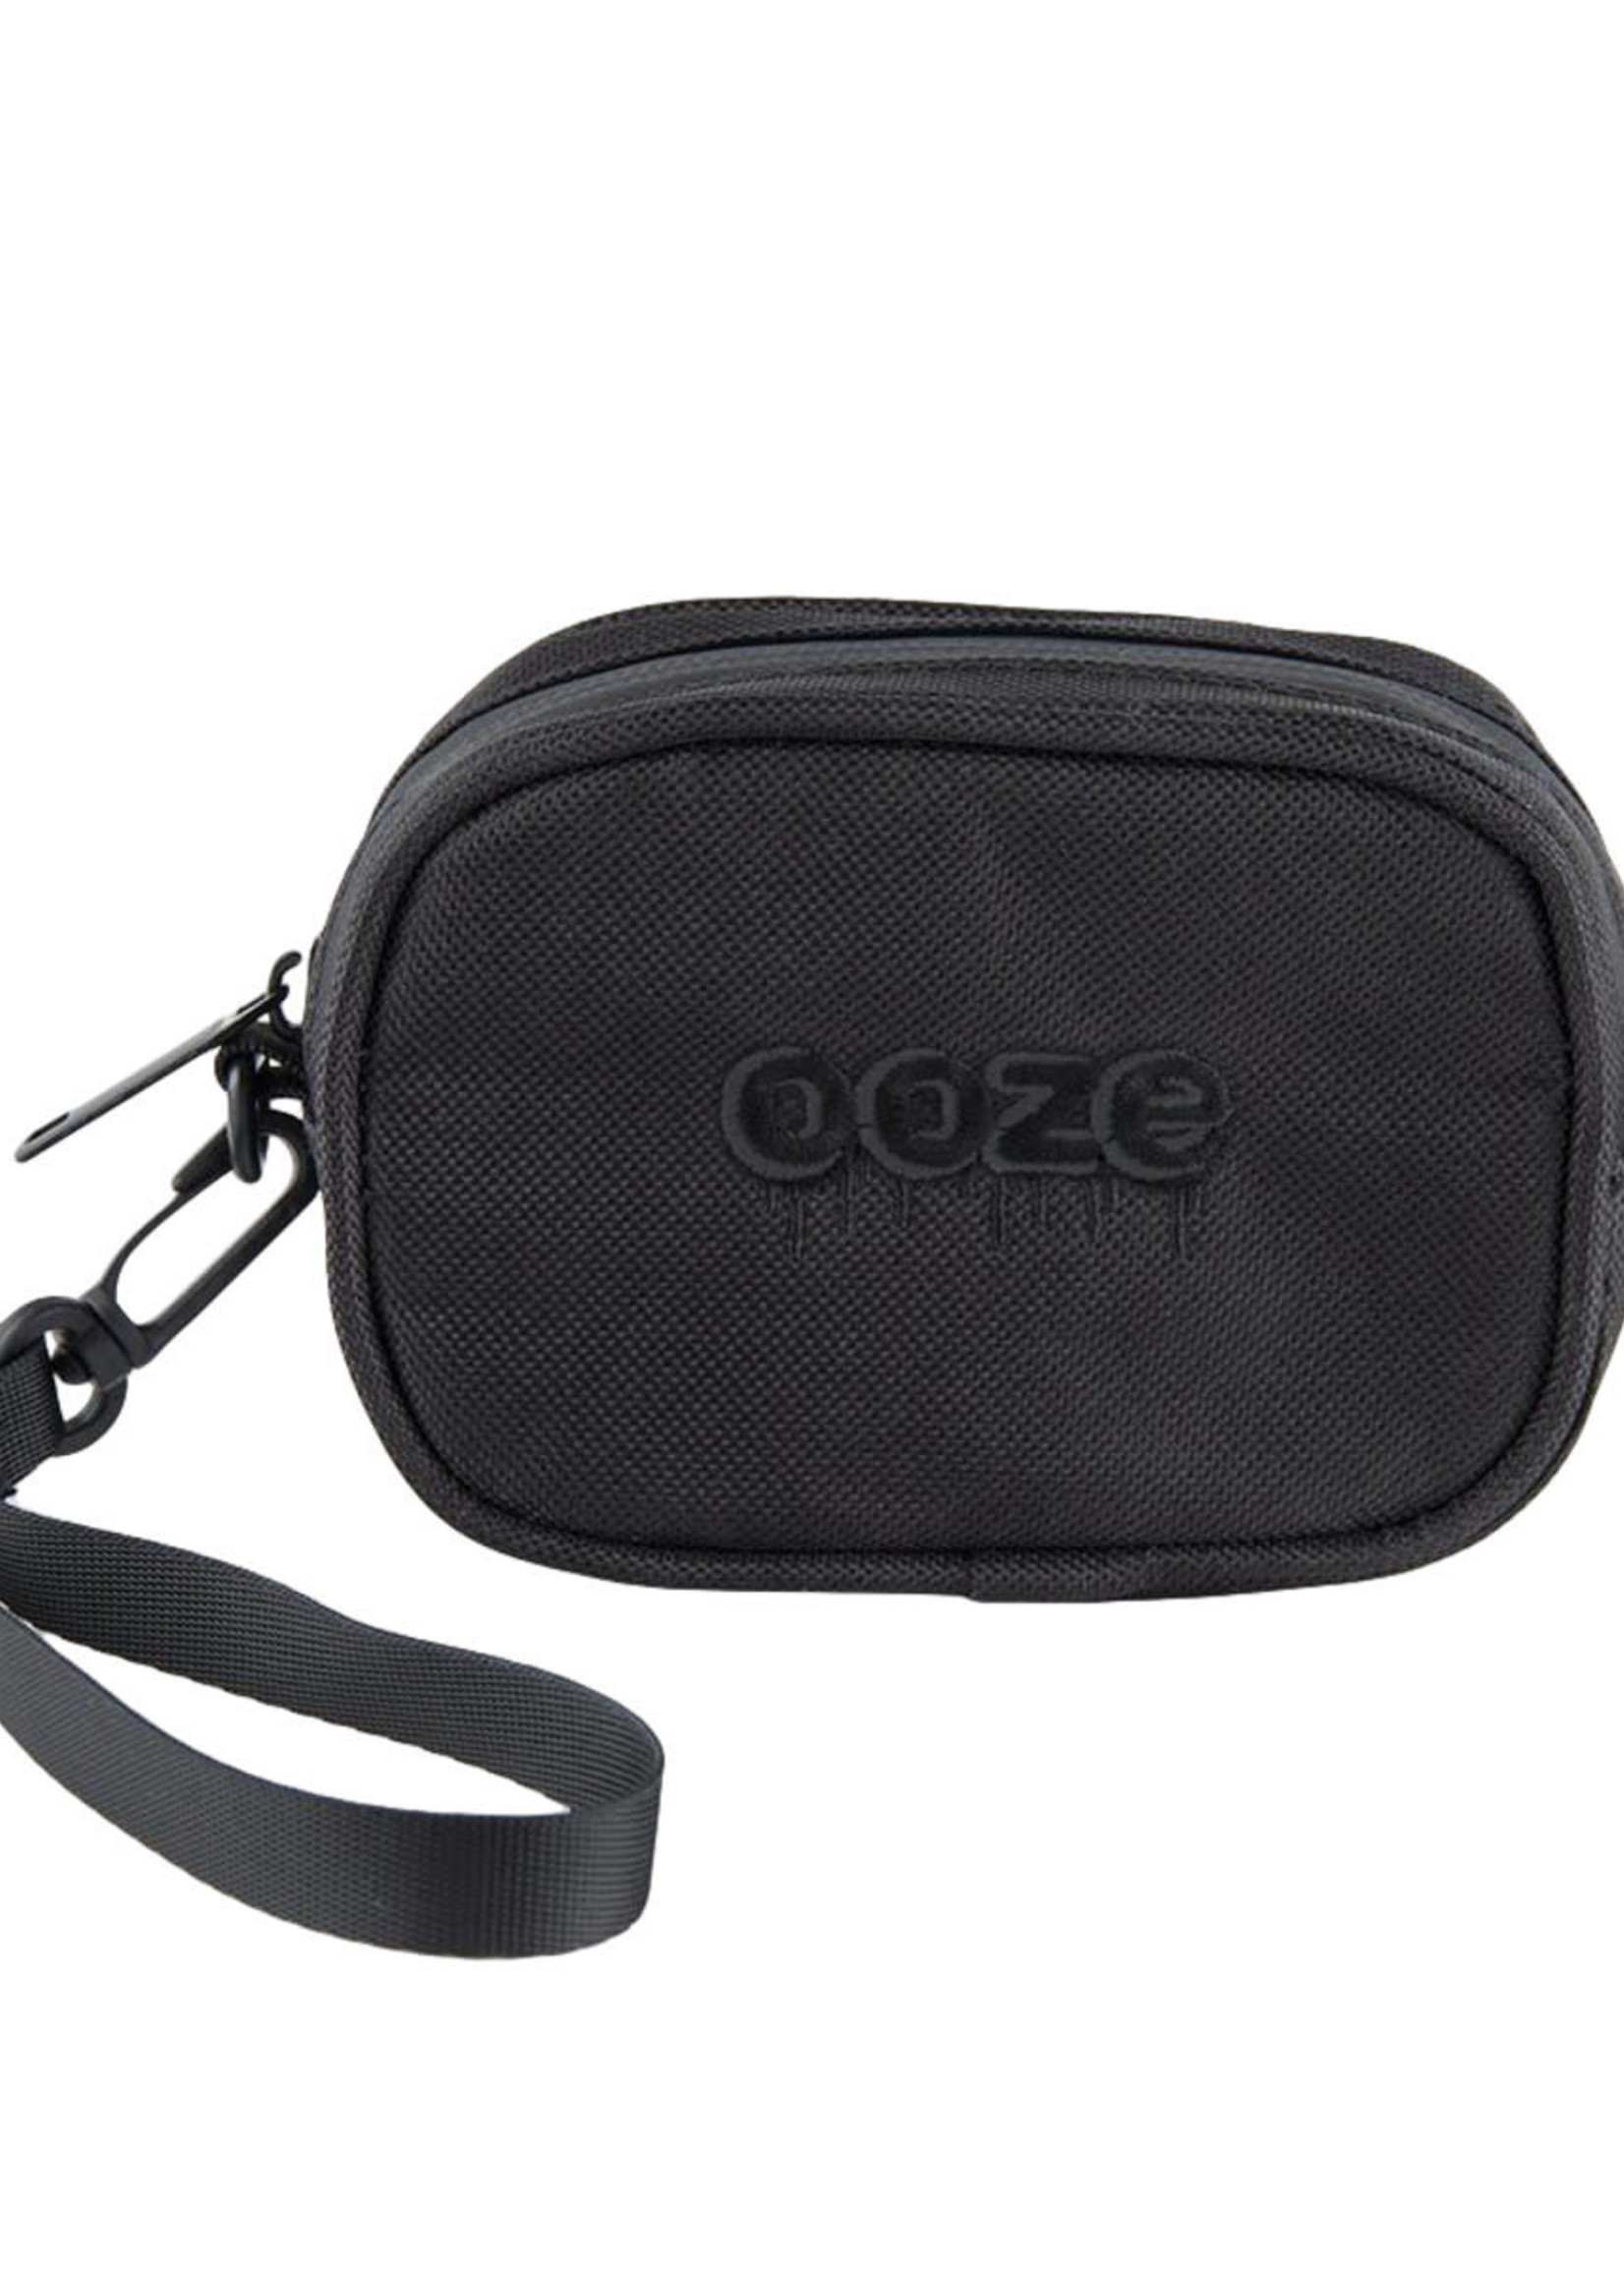 OOZE OOZE Smell Proof Travel Pouch